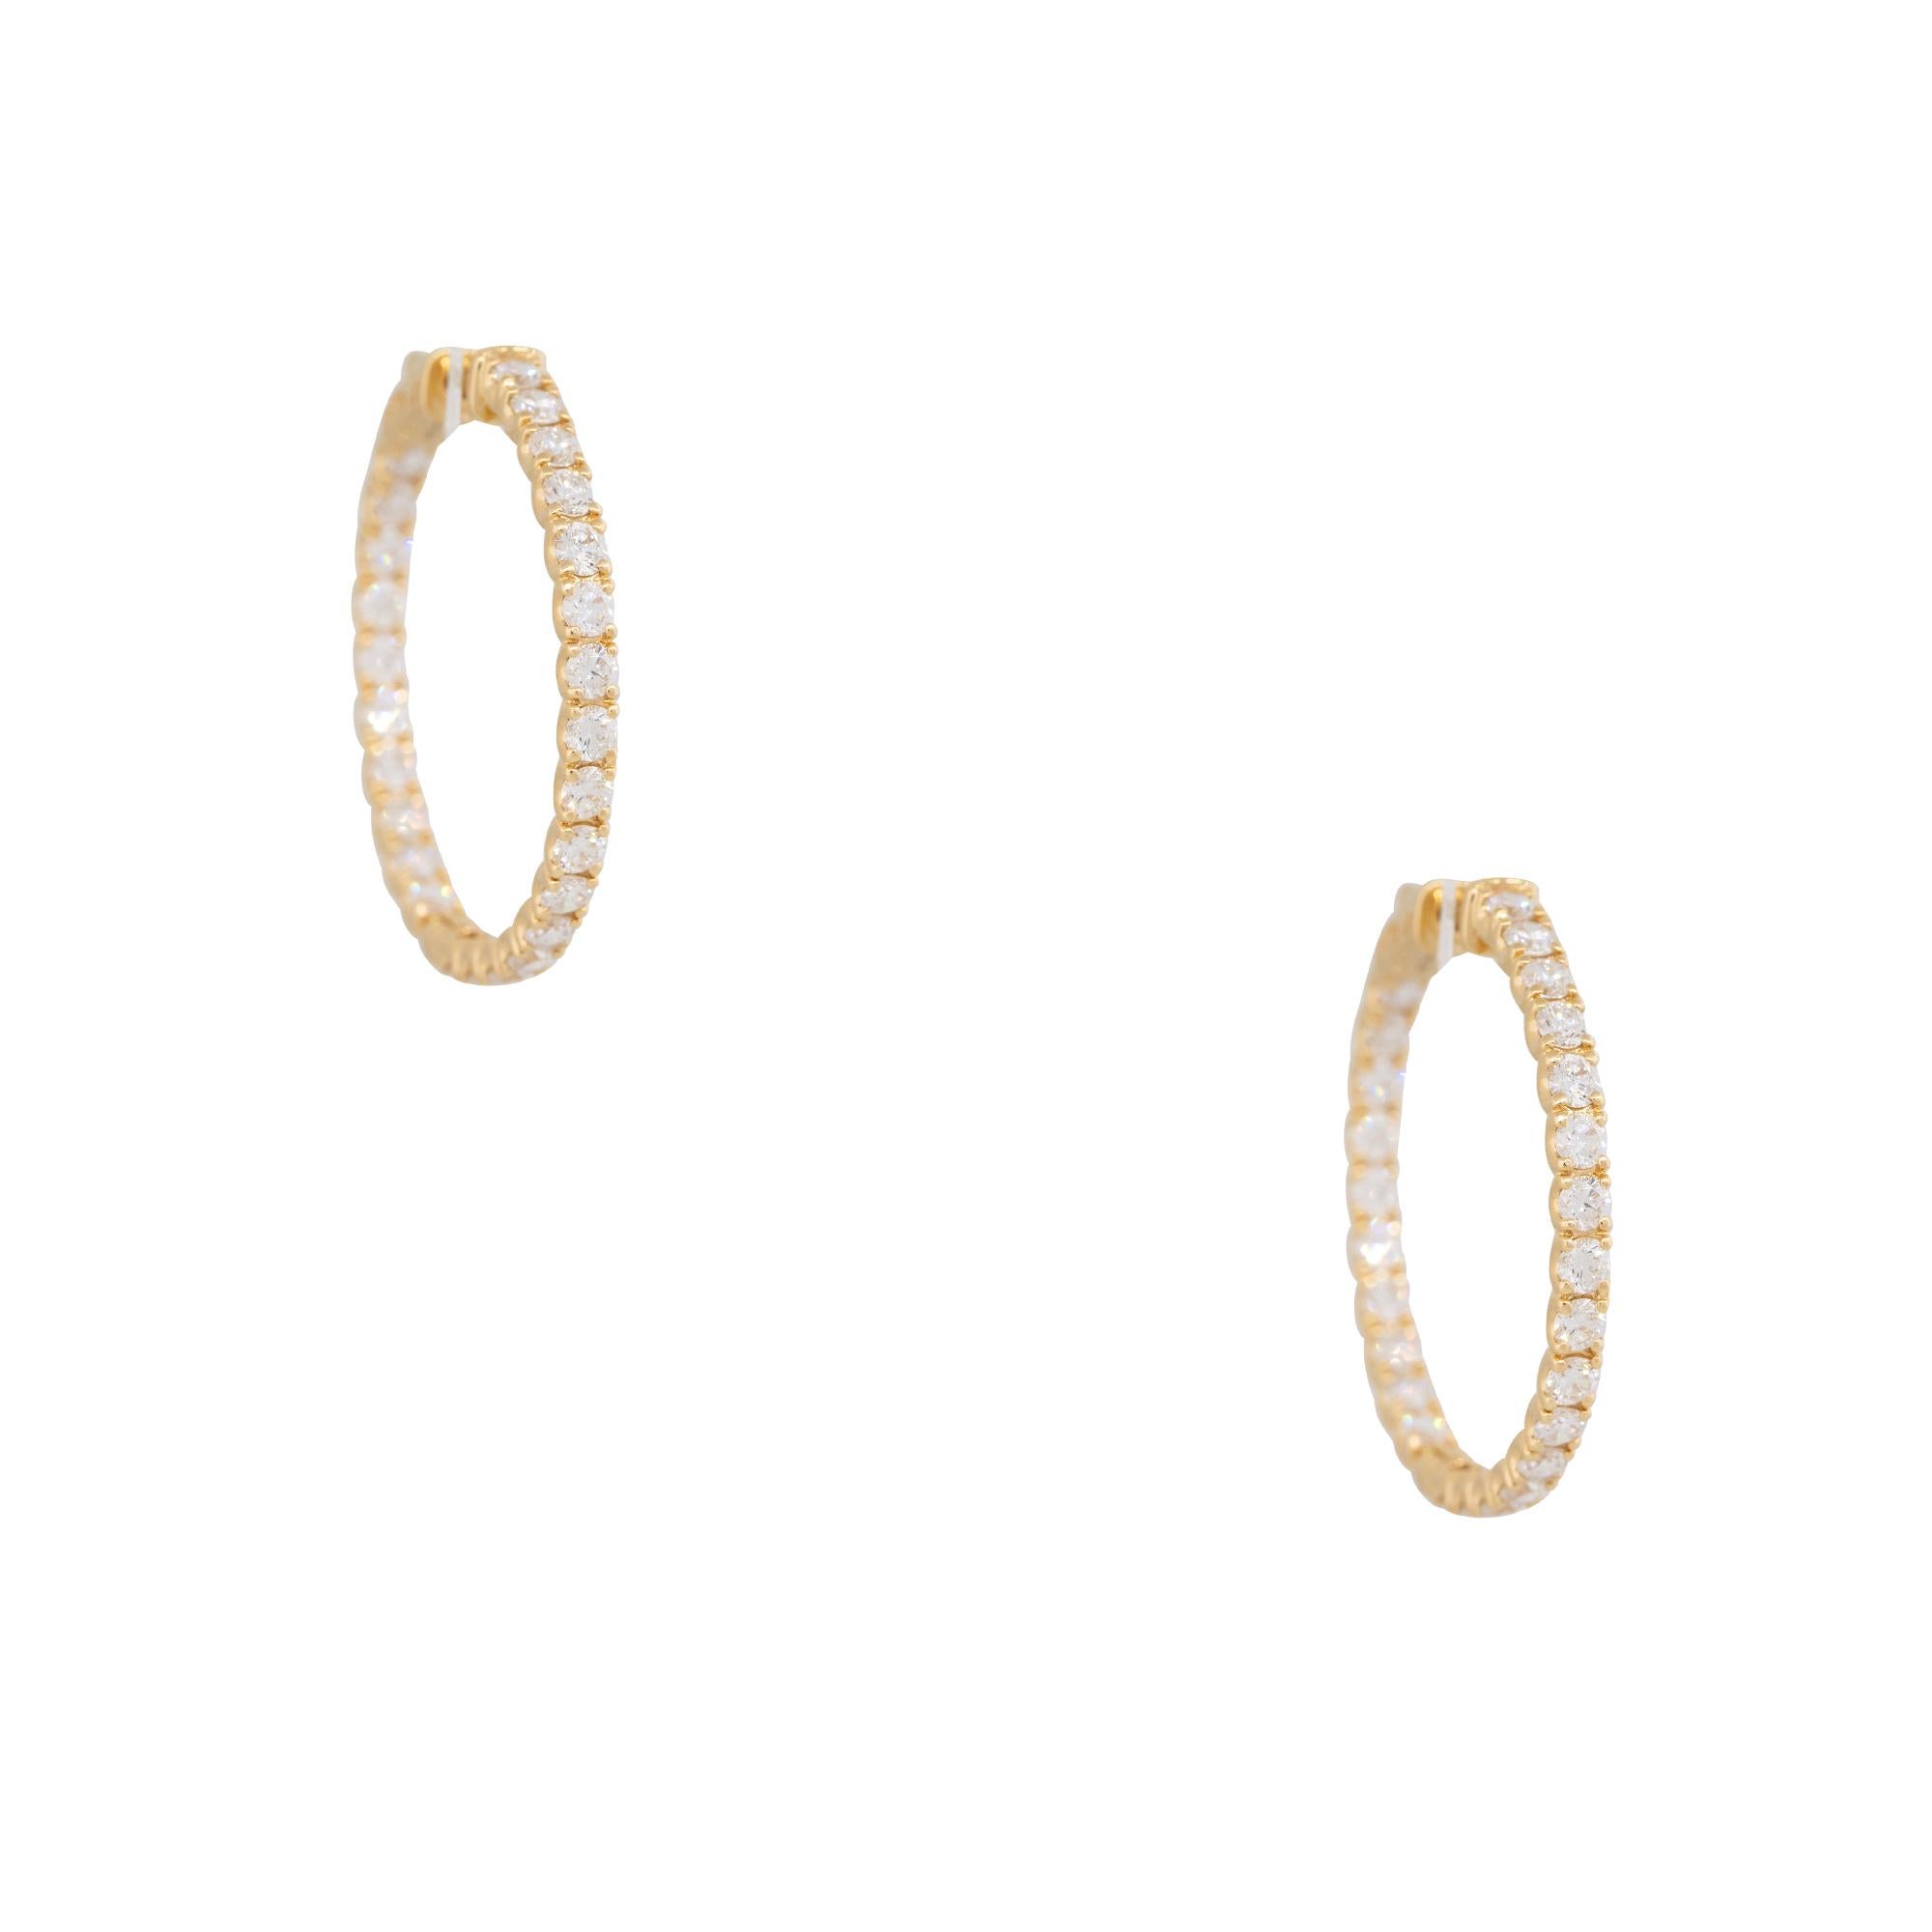 Round Cut 4.24 Carat Round Brilliant Diamond Inside-Out Hoop Earrings 18 Karat In Stock For Sale